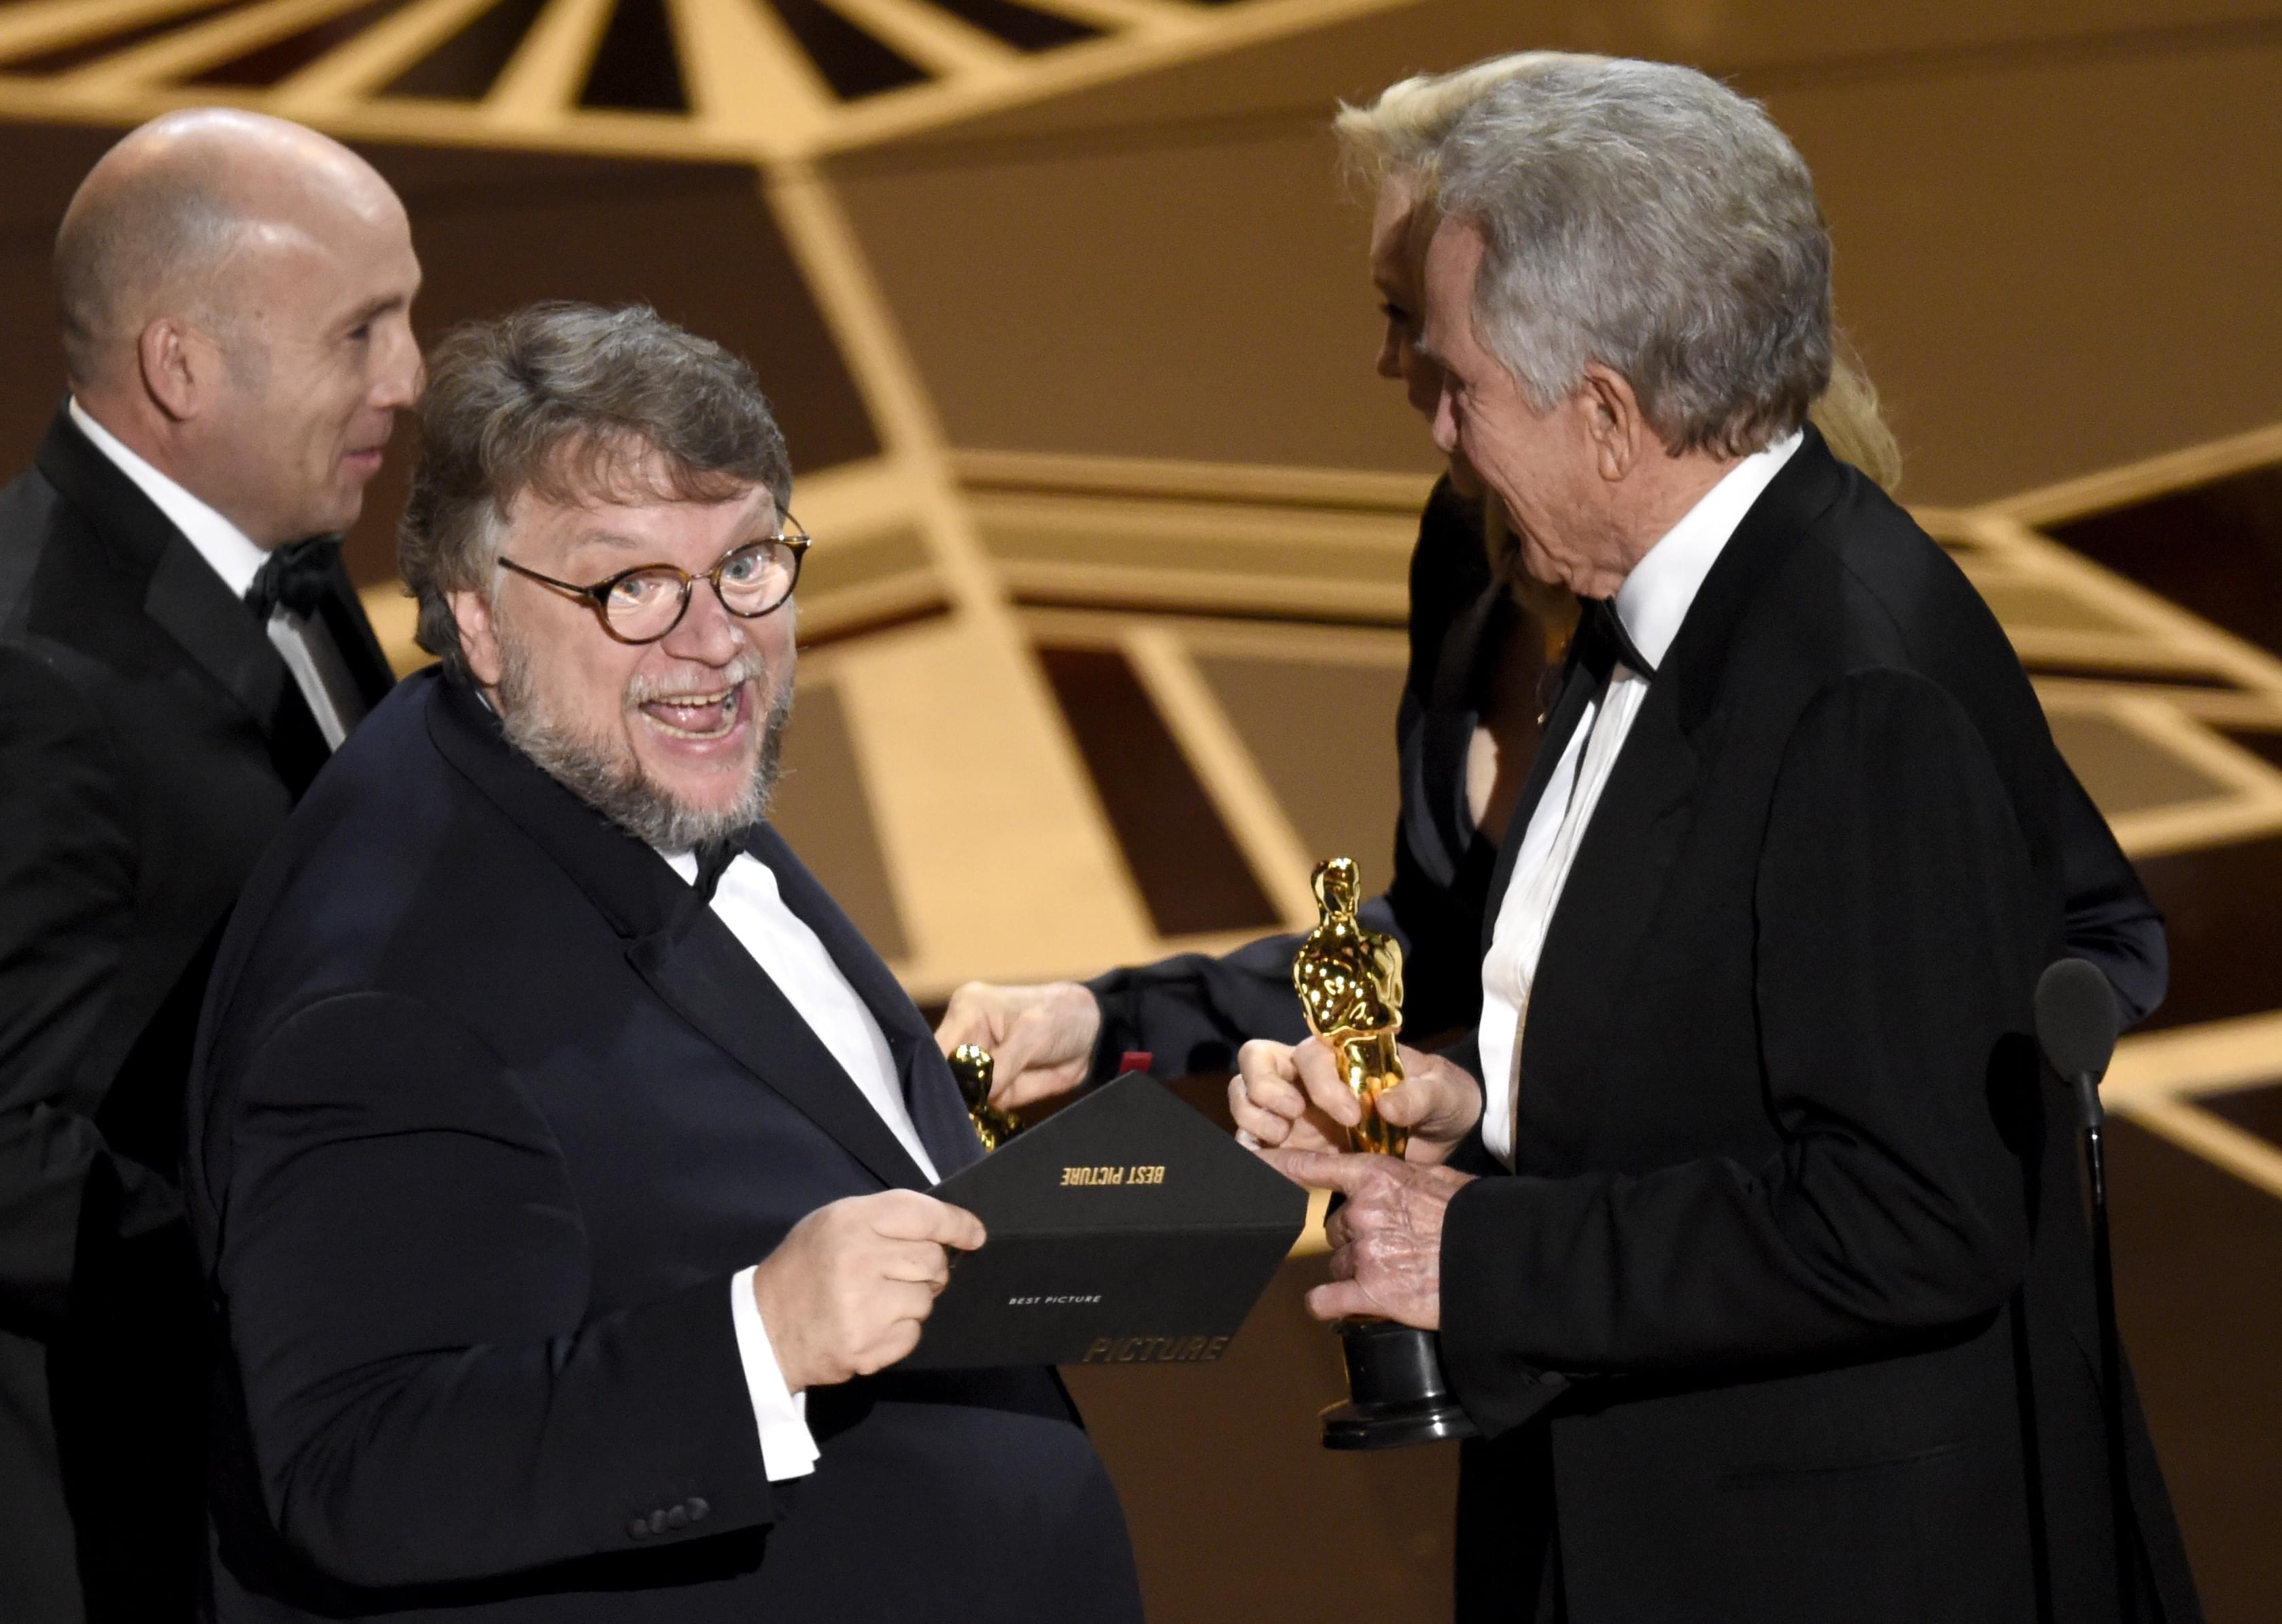 arren Beatty, presents Guillermo del Toro with the award for best picture for "The Shape of Water" at the Oscars.